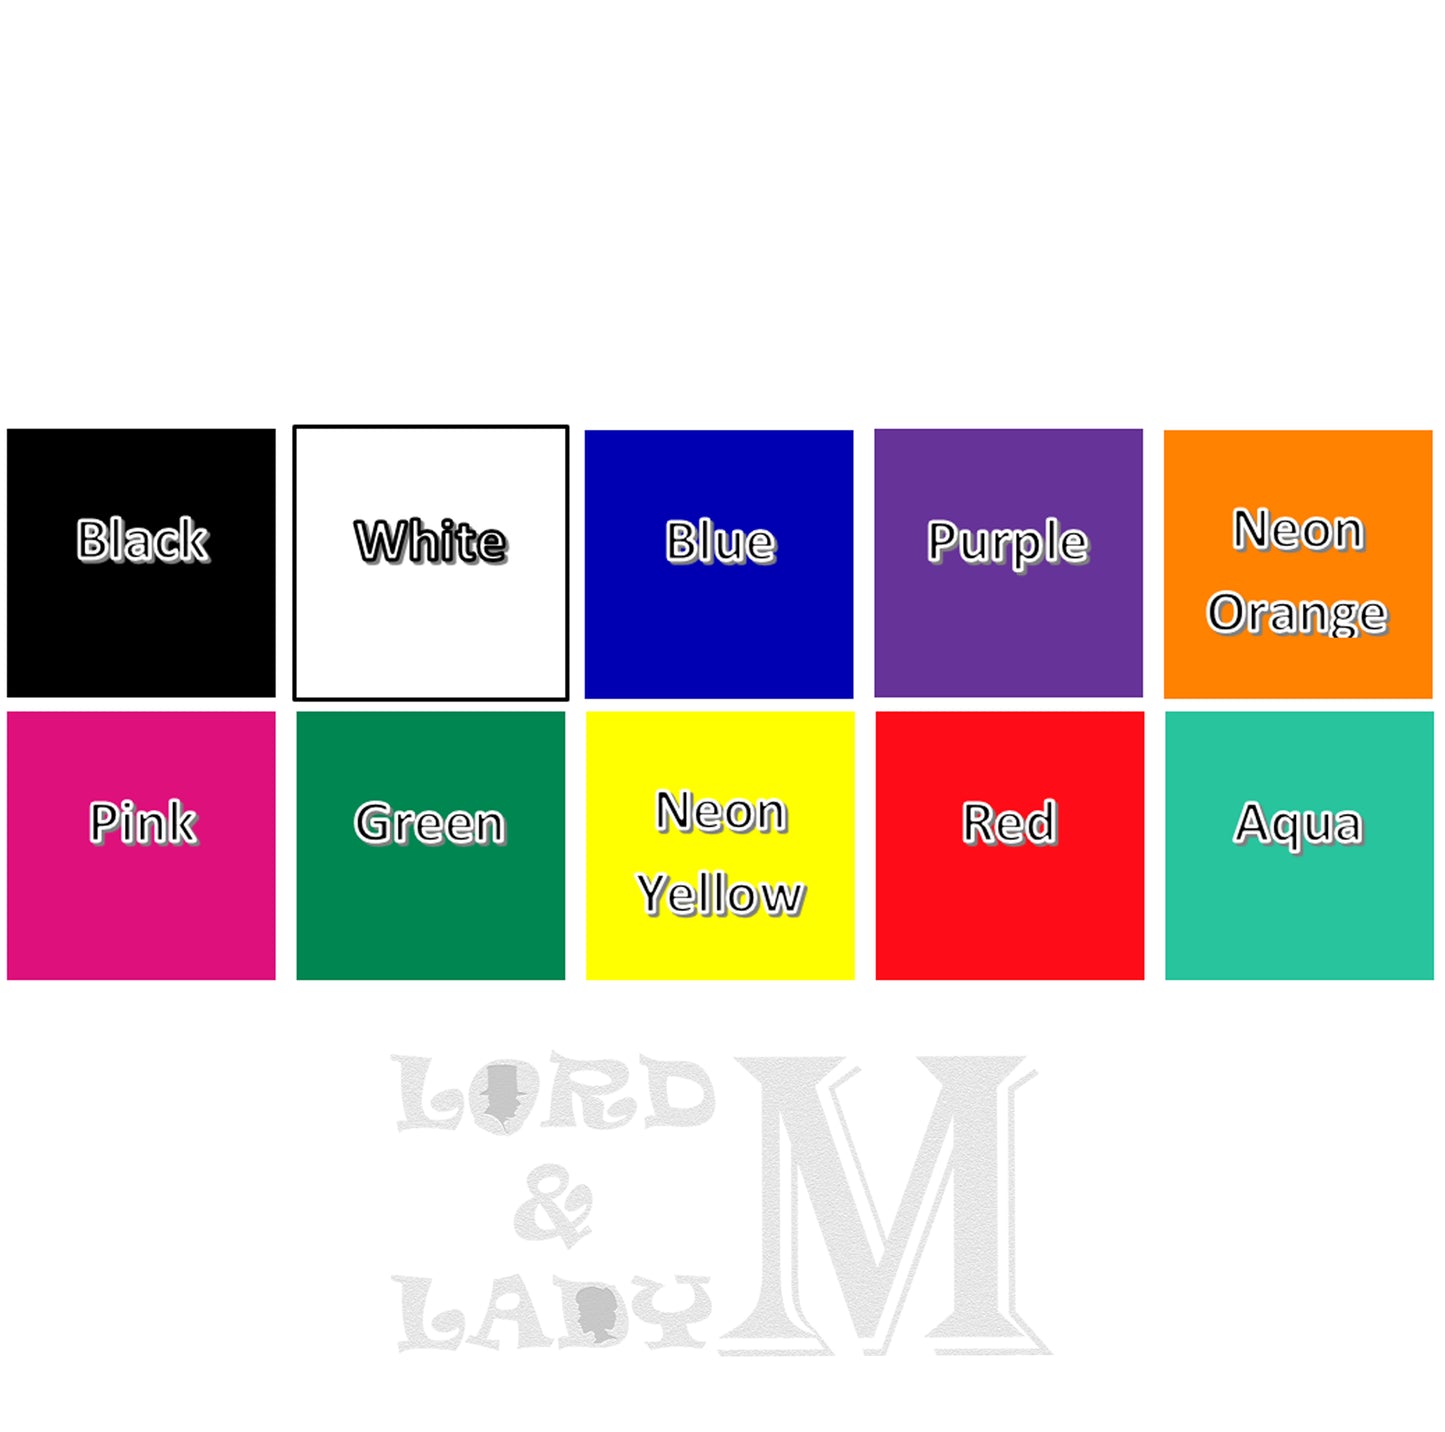 Iron on name labels - second image on colour choice with colour names